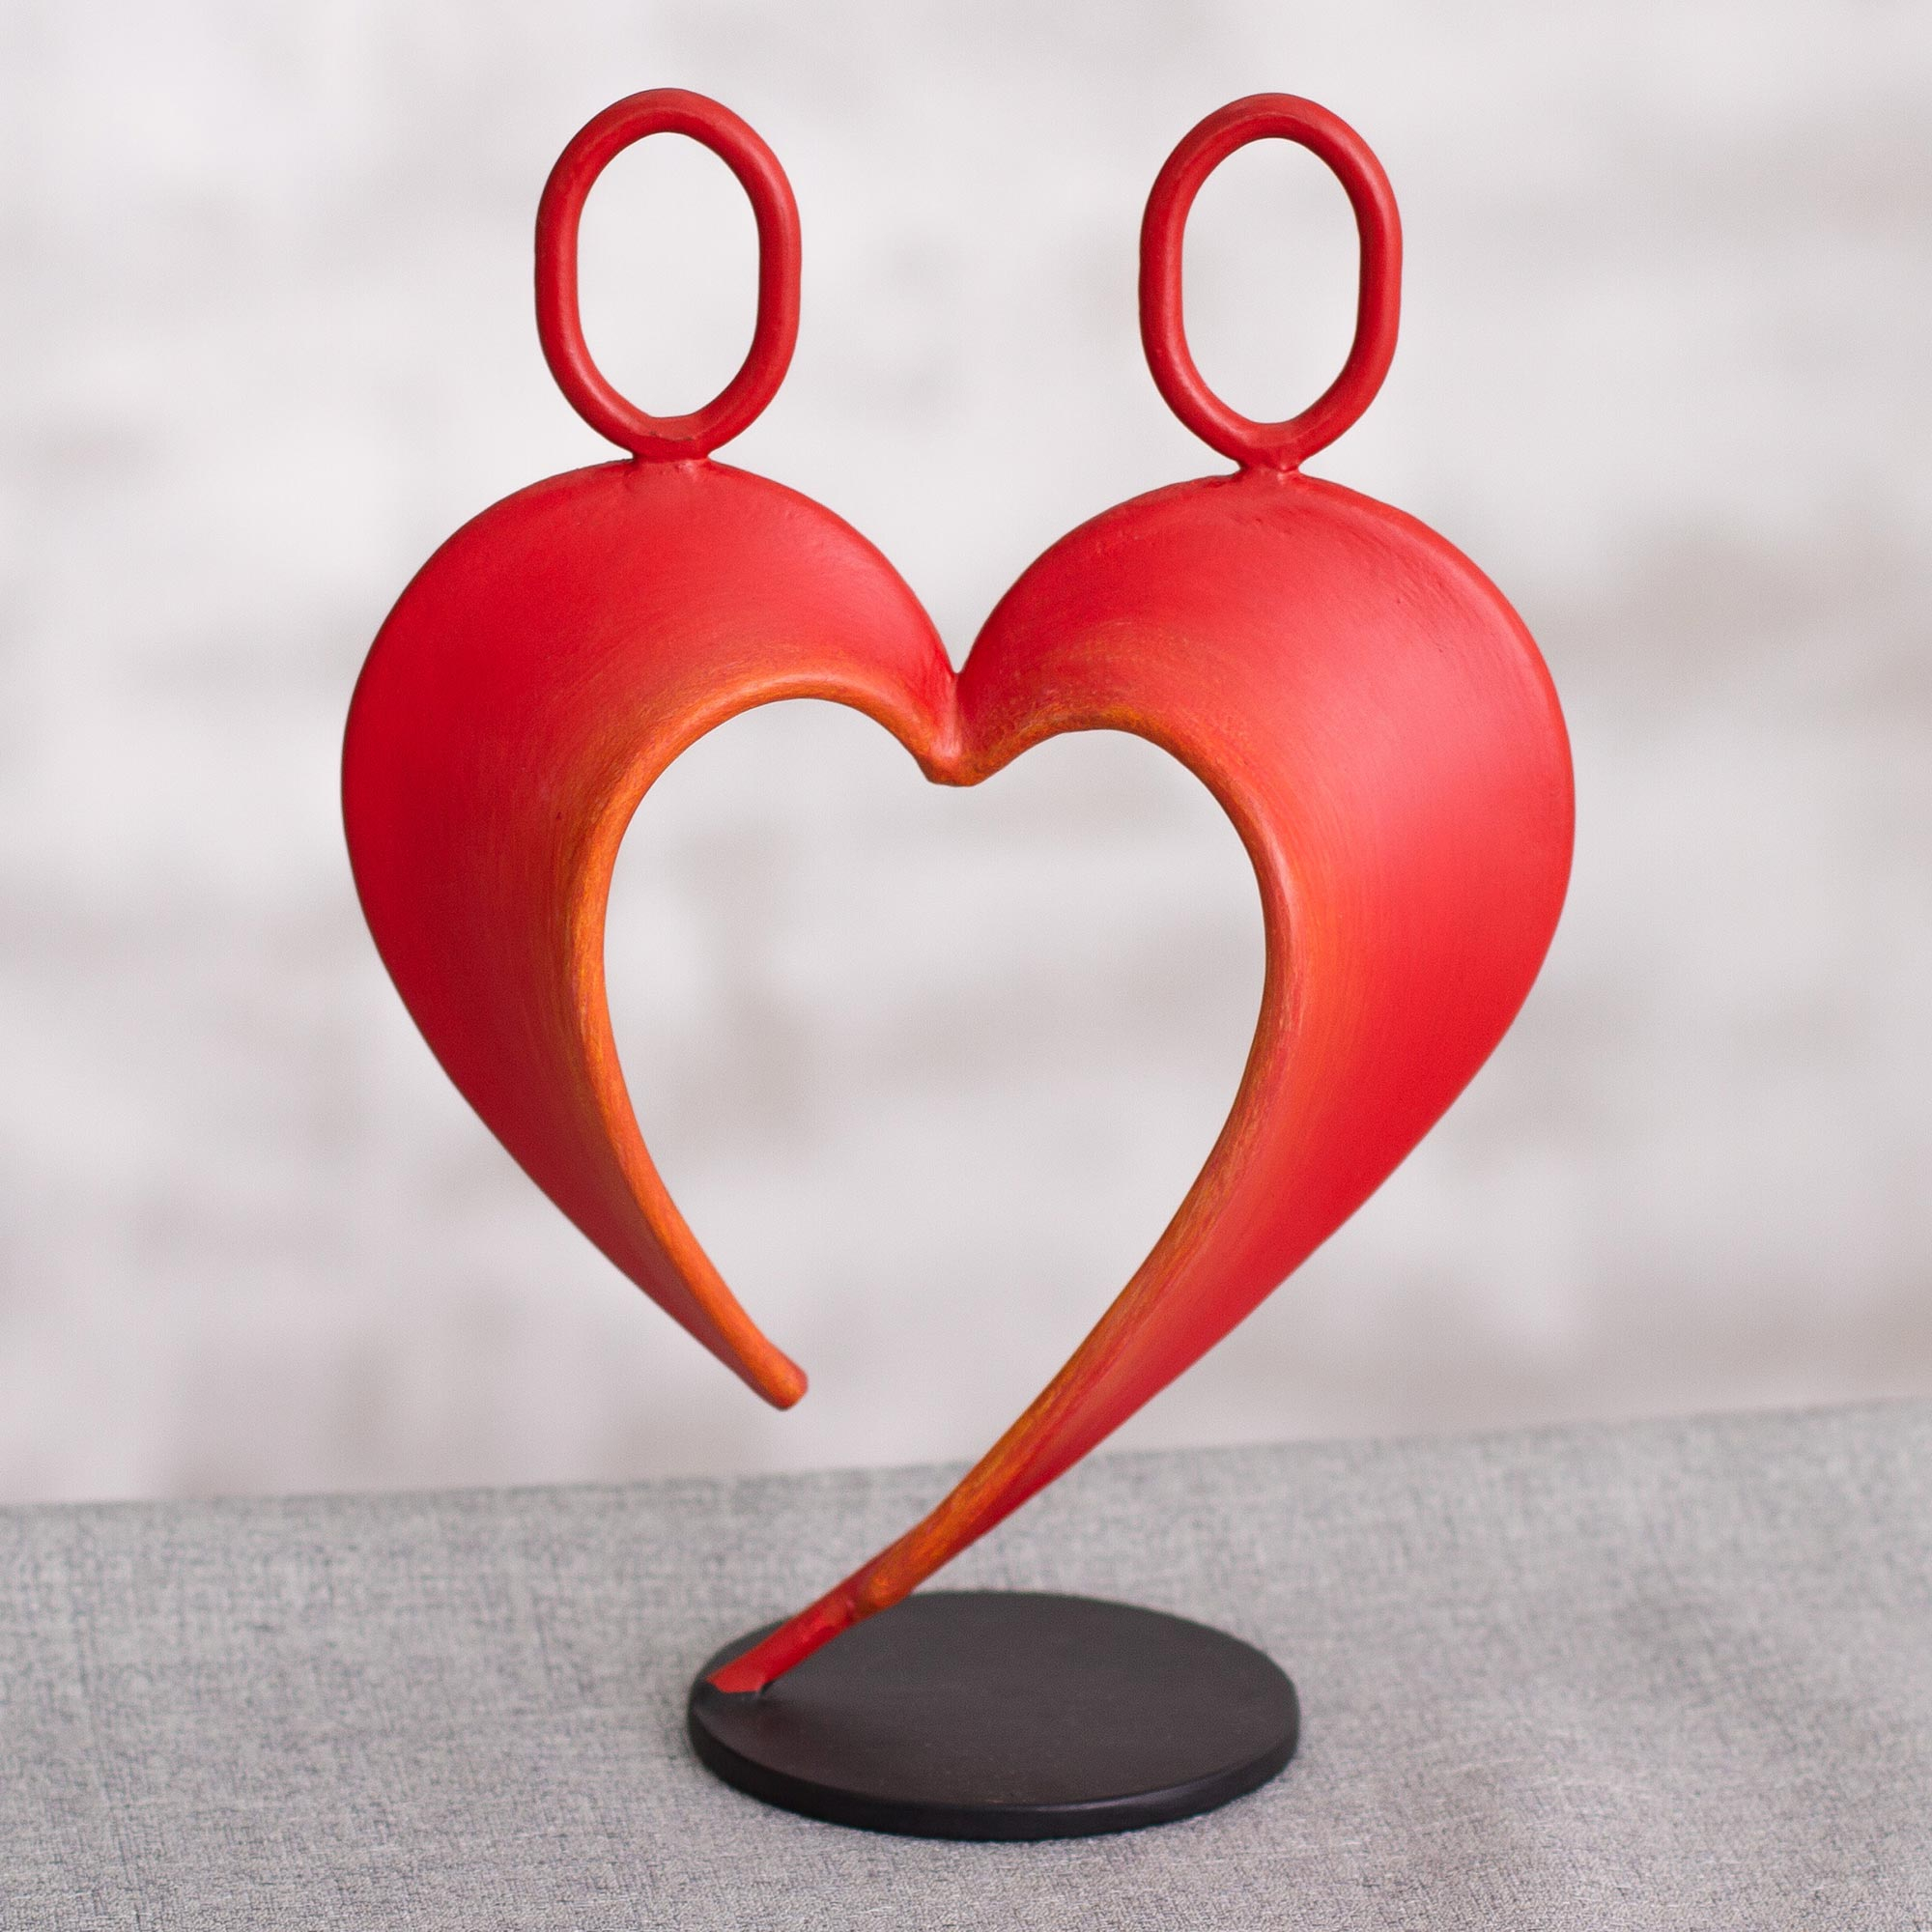 Abstract Steel Heart Sculpture in Red from Peru - Our Heart in Red | NOVICA